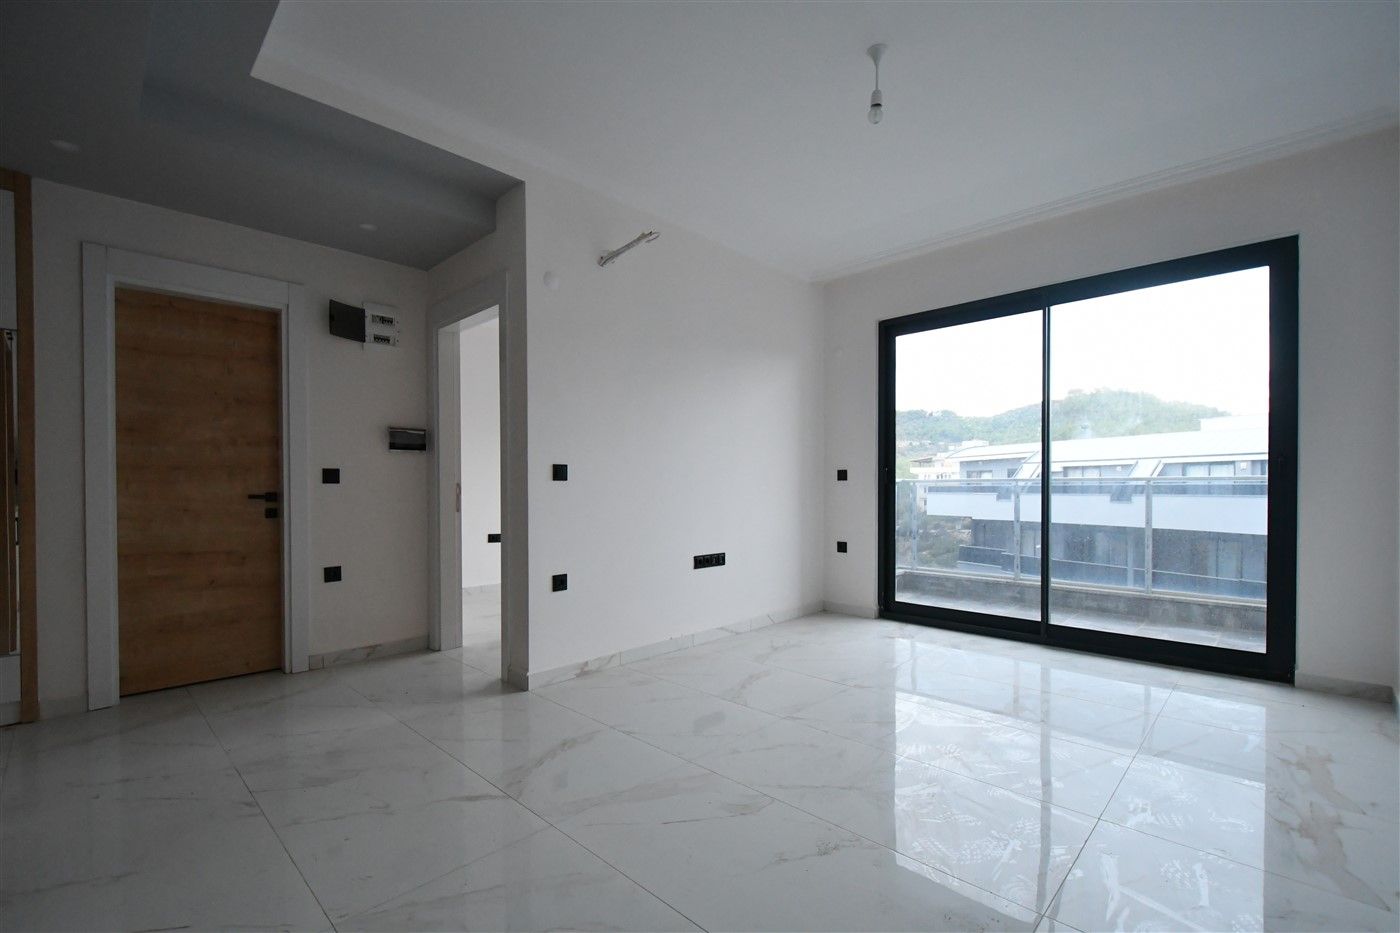 New 1+1 apartment in picturesque Avsallar district, new residence